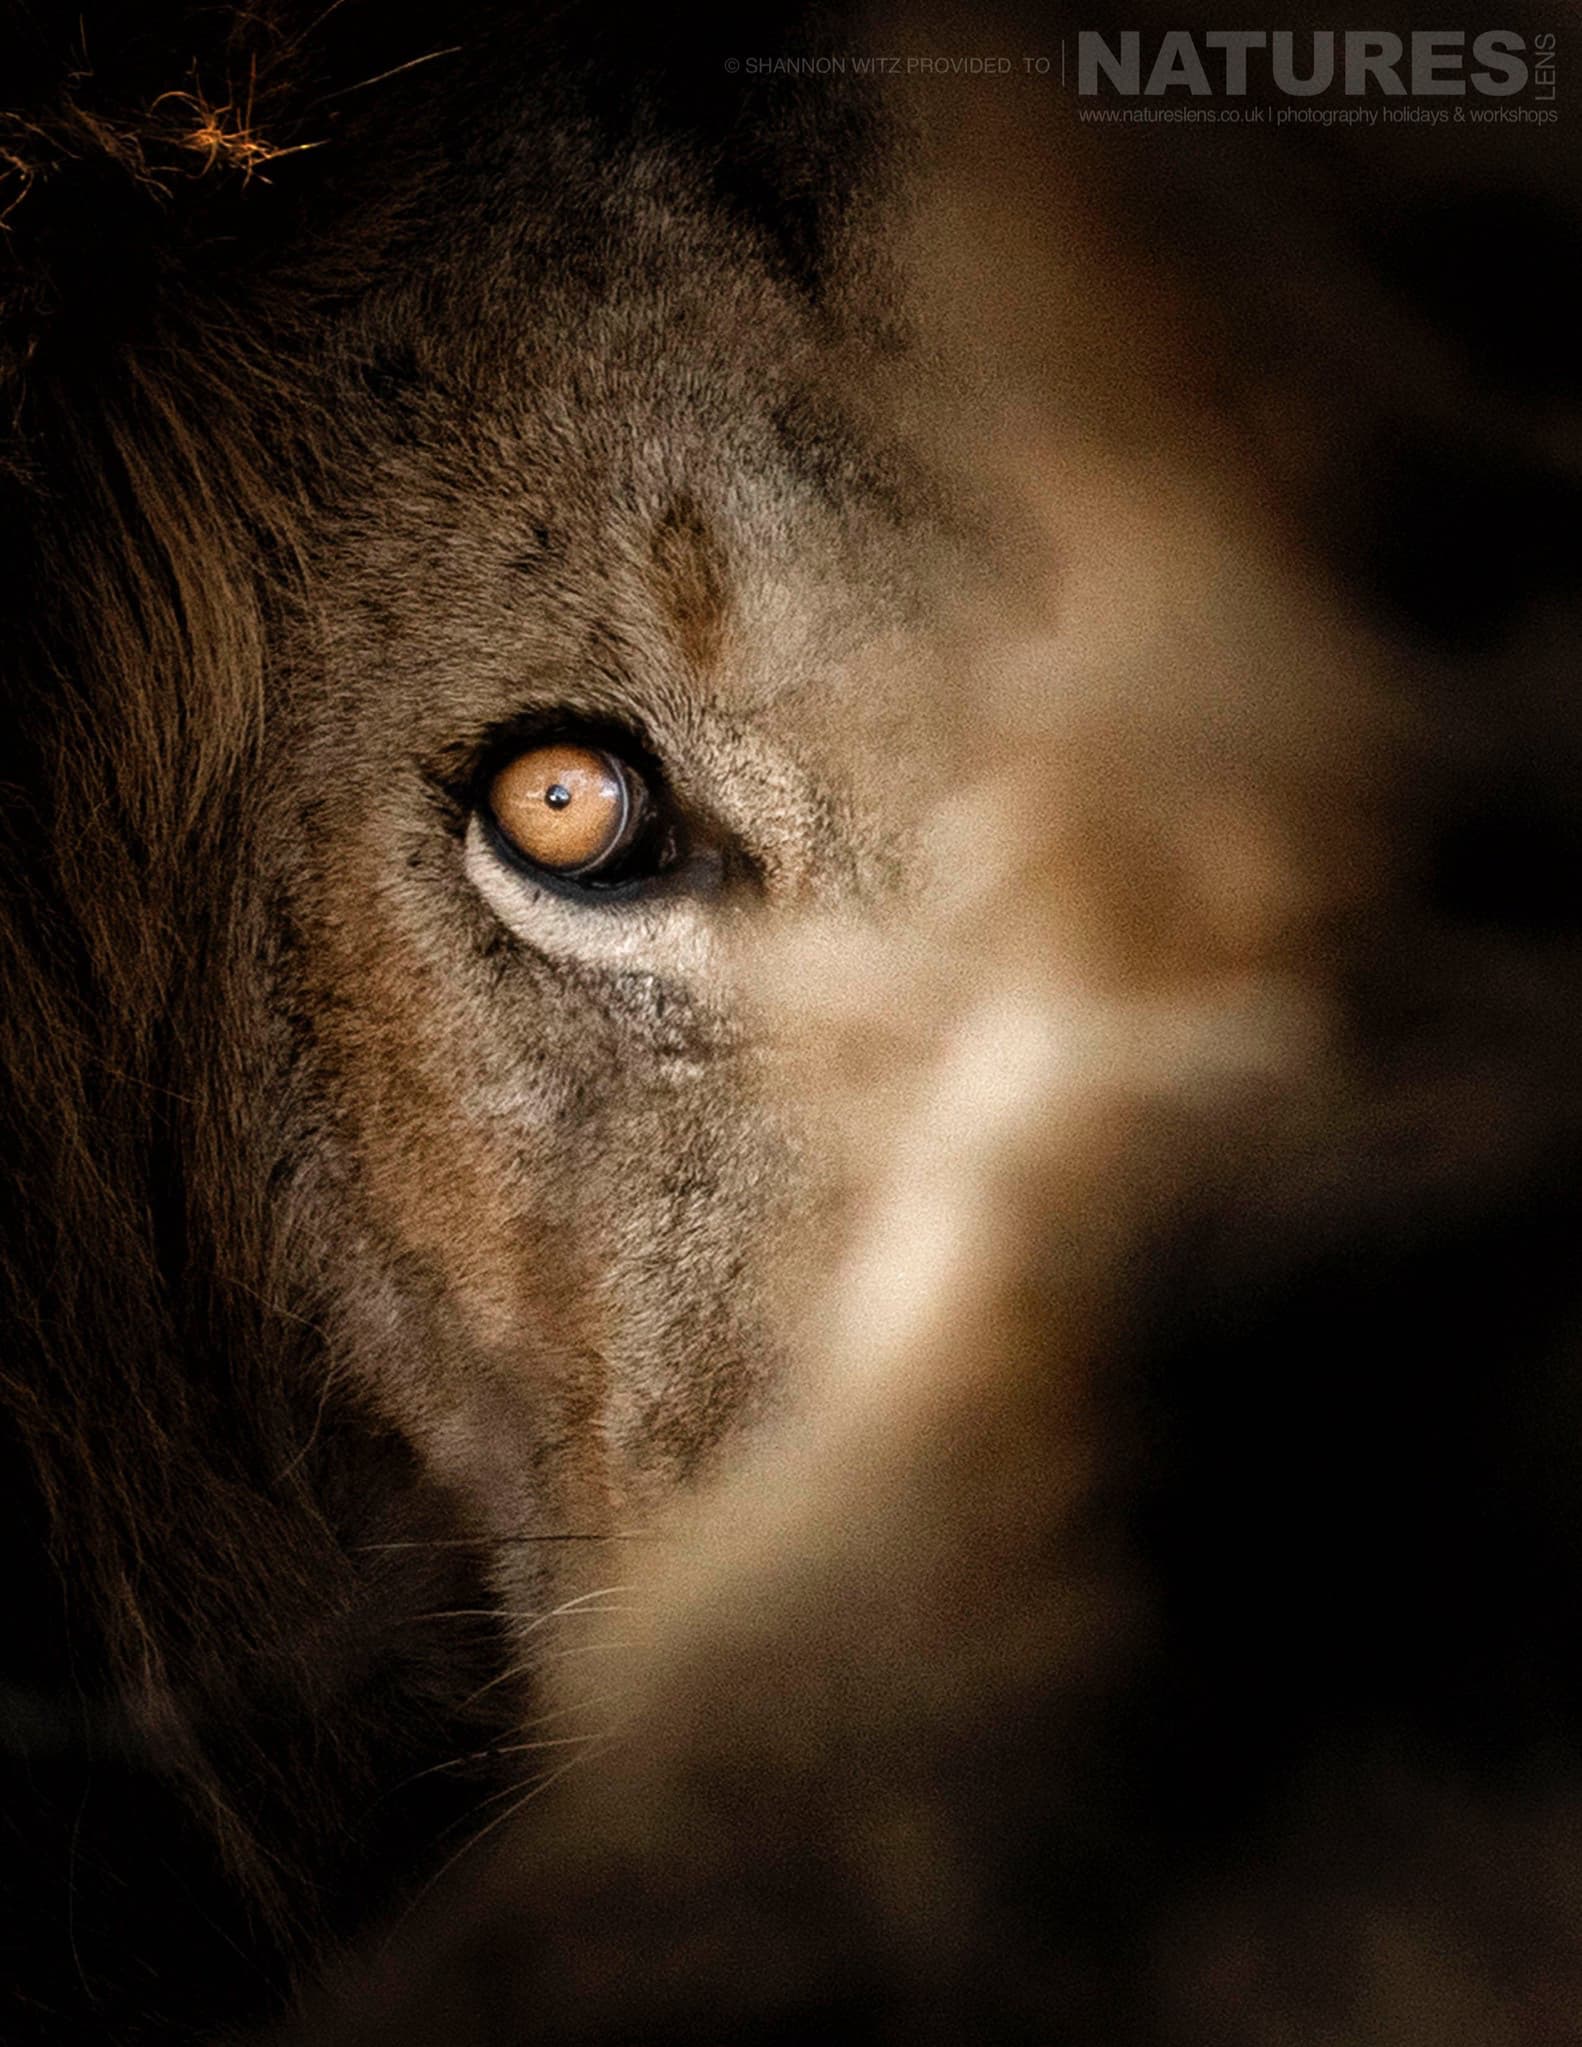 A Portrait Of One Of The Lions Who Rule The Lobo Region, The Region Of Tanzania That We Use For The Natureslens Wildlife Of The Serengeti Photography Holiday